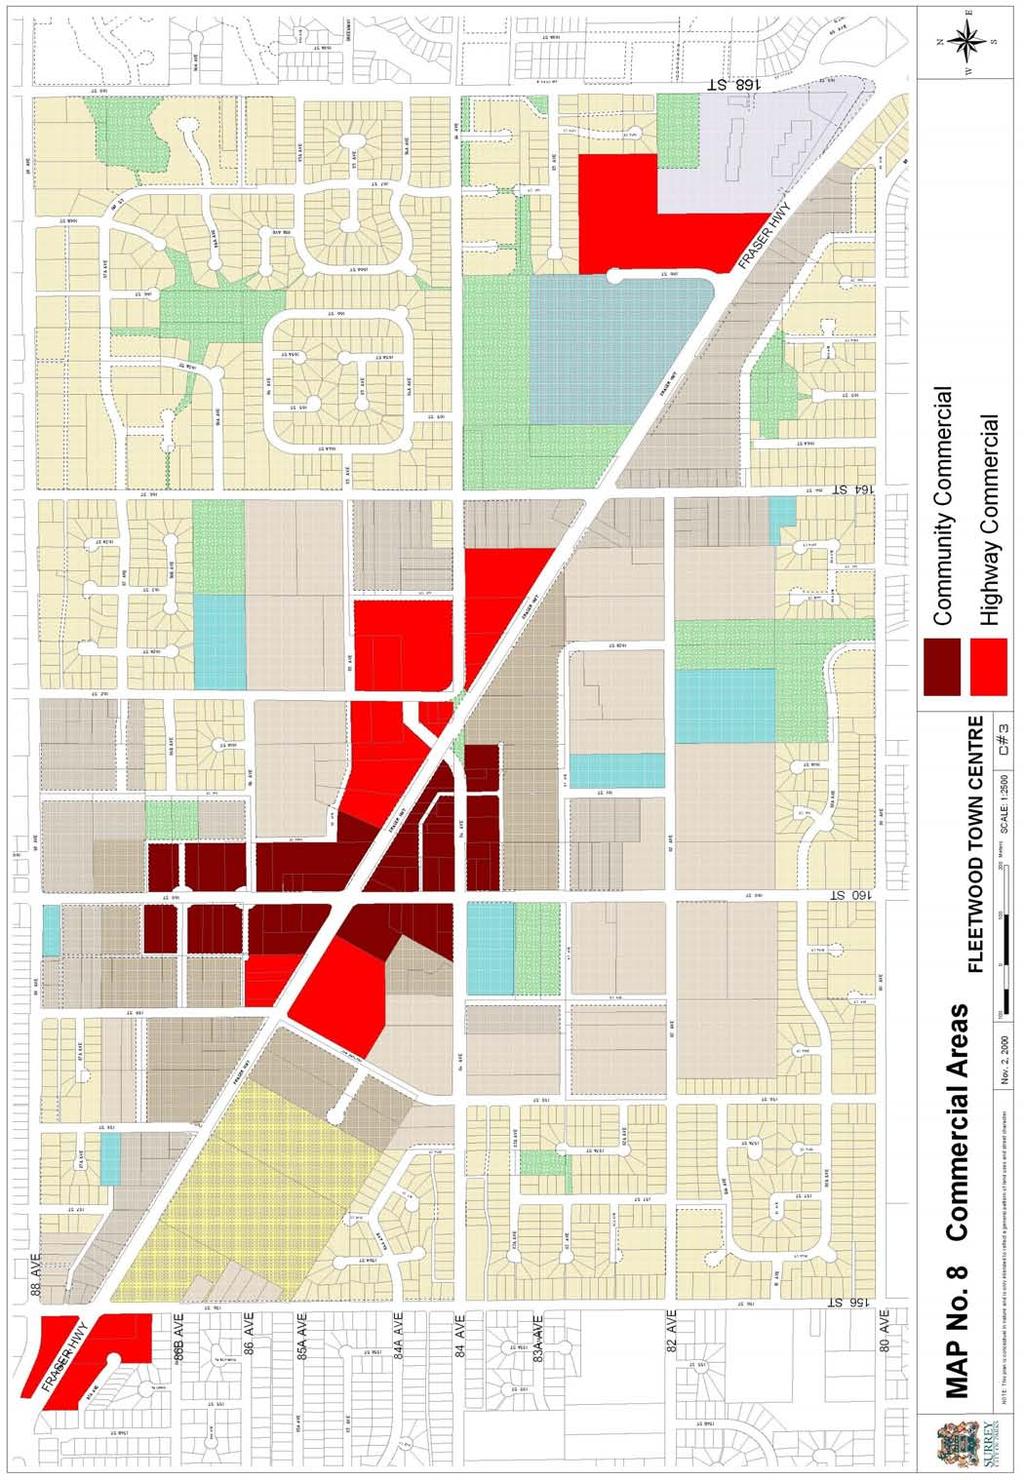 Fleetwood Town Center Land Use